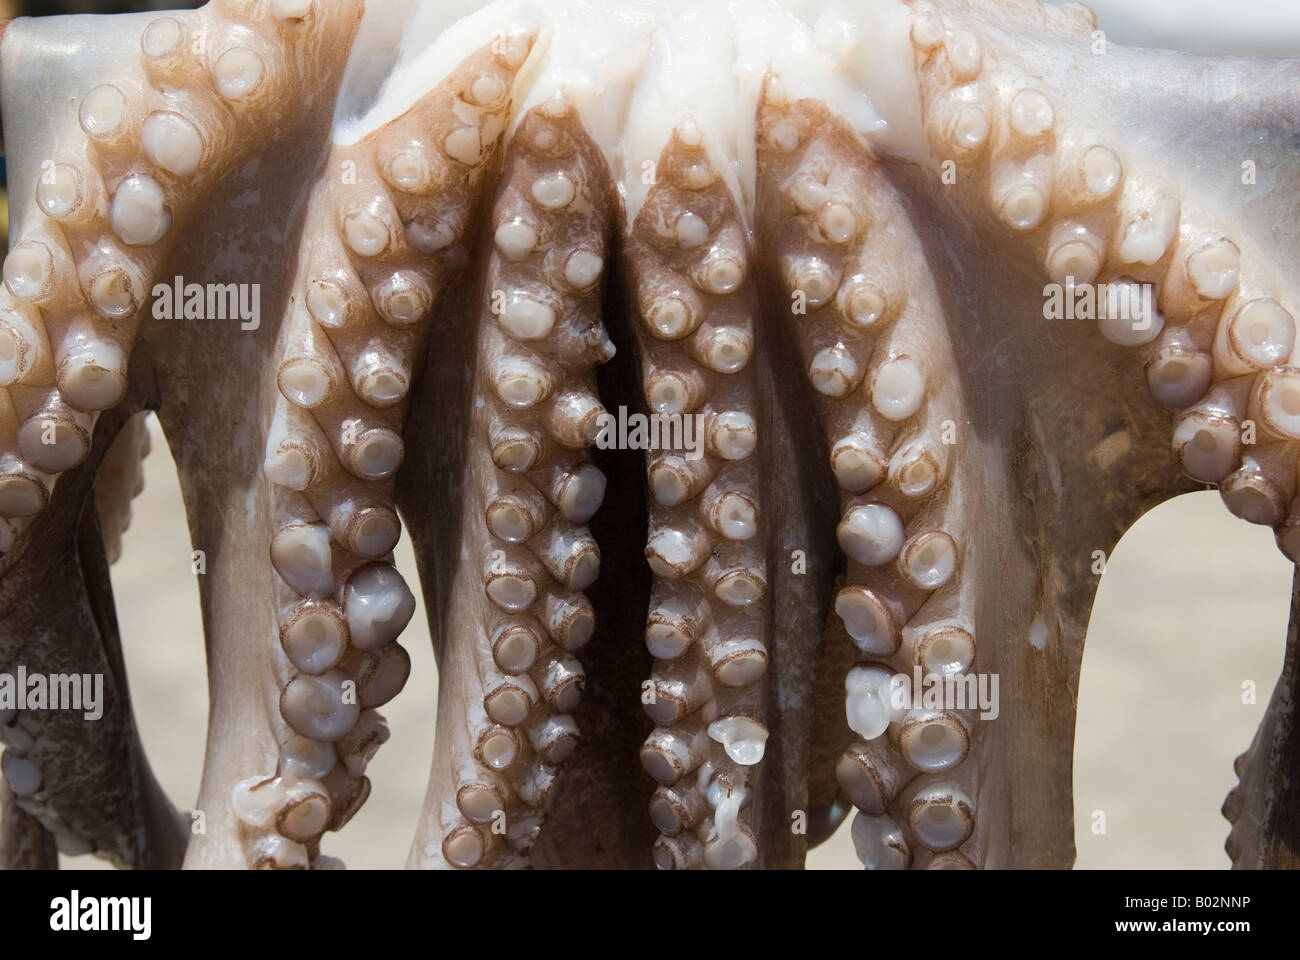 Close-up detail of octopus suction cups along their arms, hanging in the sun at the port town of Naoussa on the island of Paros, Greece Stock Photo